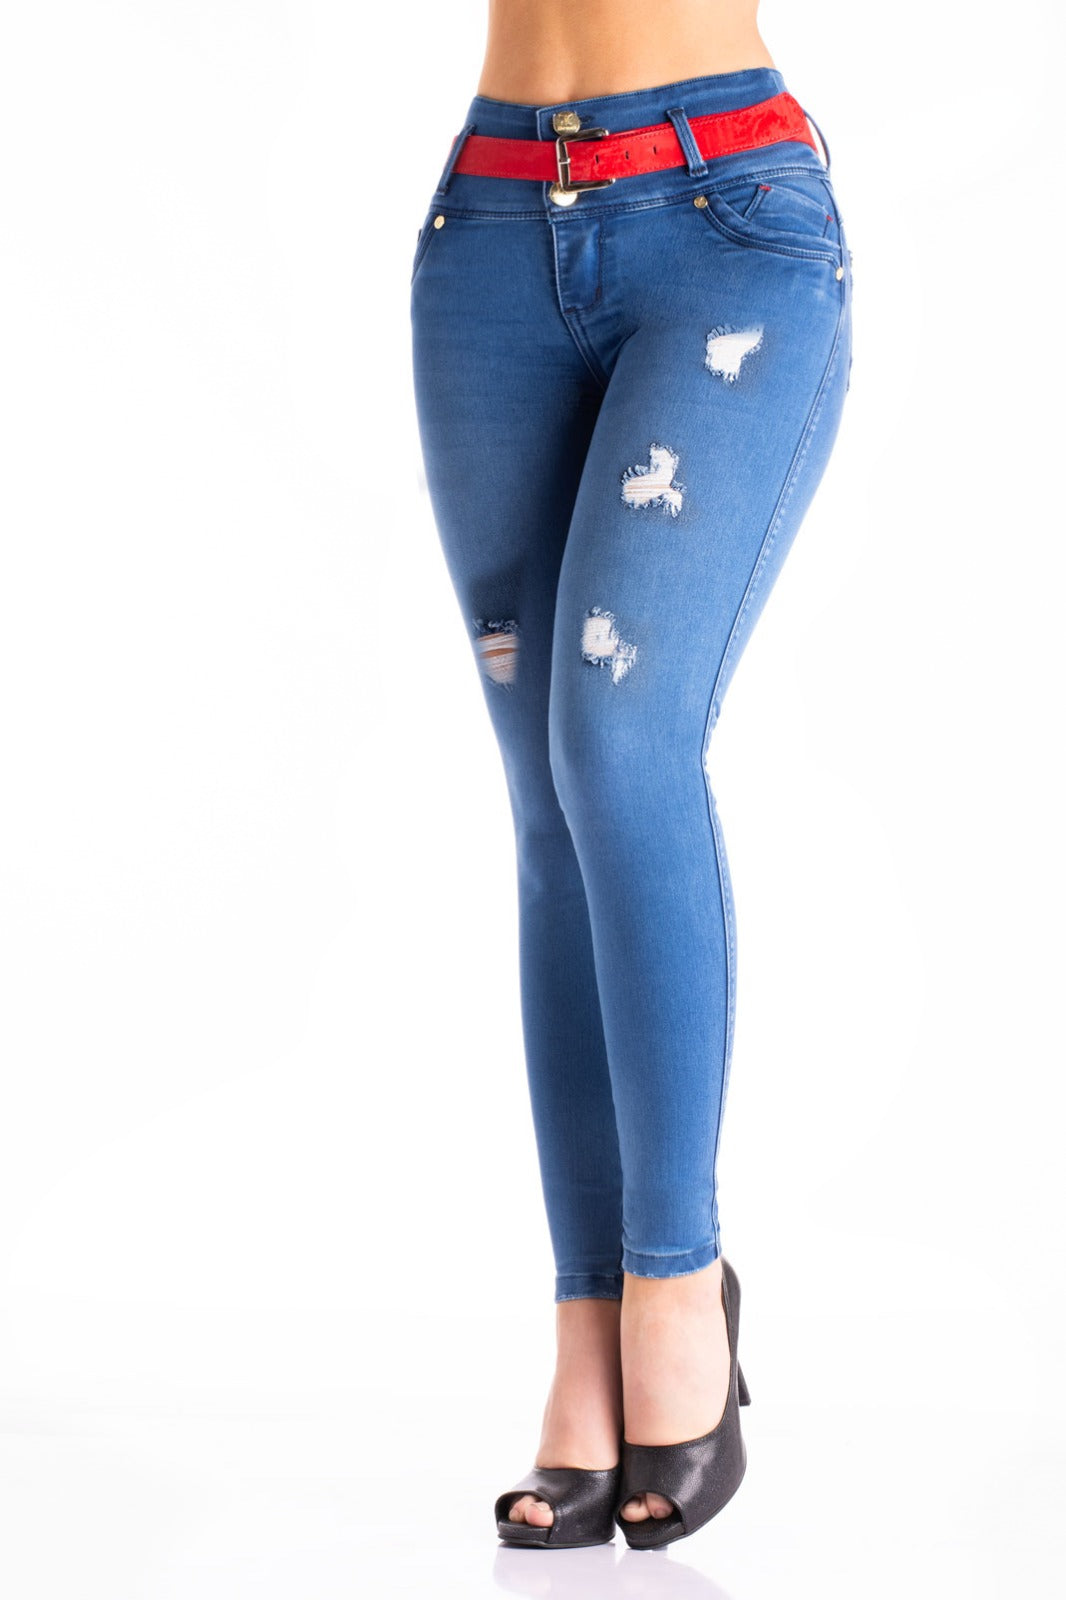 Ripped Blue Push Up Jeans with Red Belt - H022